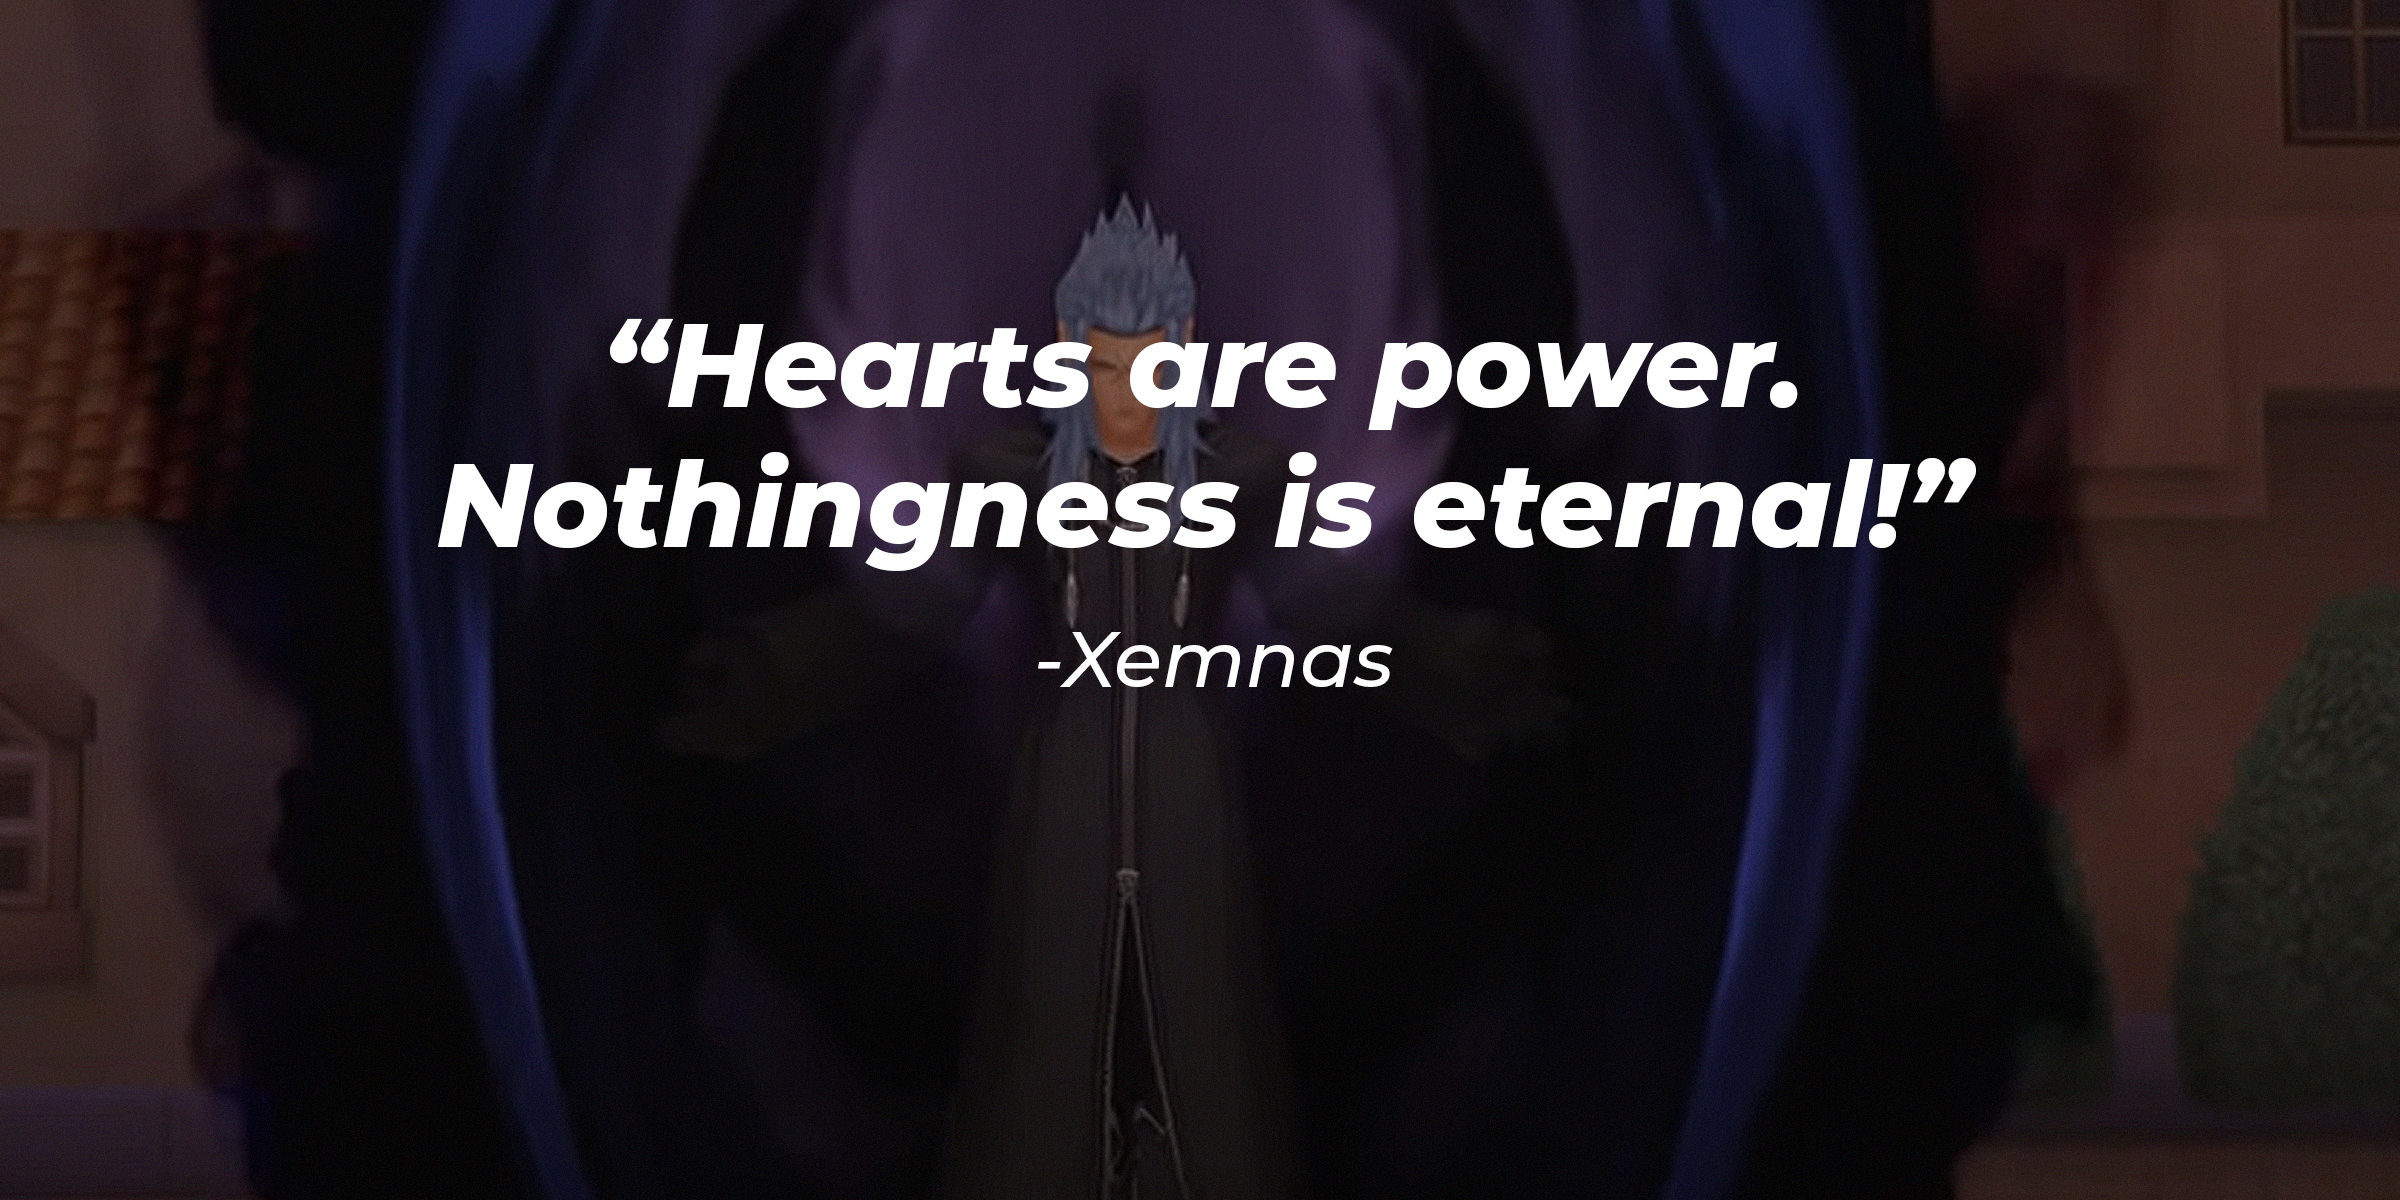 An image of Xenmas with their quote: “Hearts are power. Nothingness is eternal!” | Source: youtube.com/PlayStation